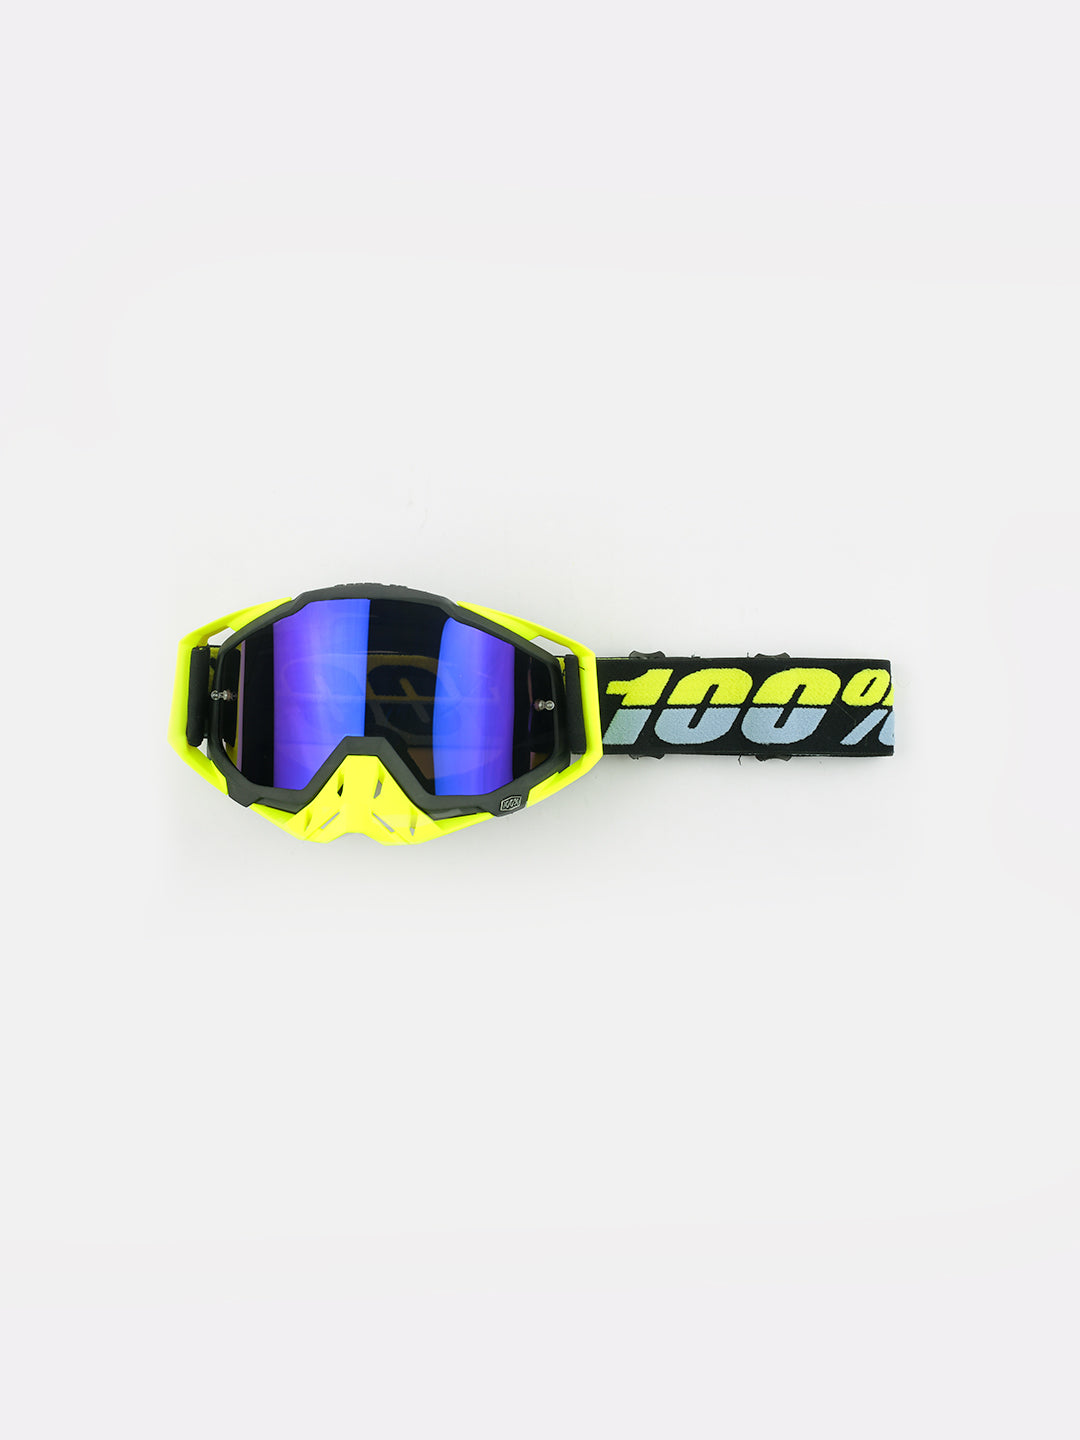 100% Goggles Yellow Blue Tint